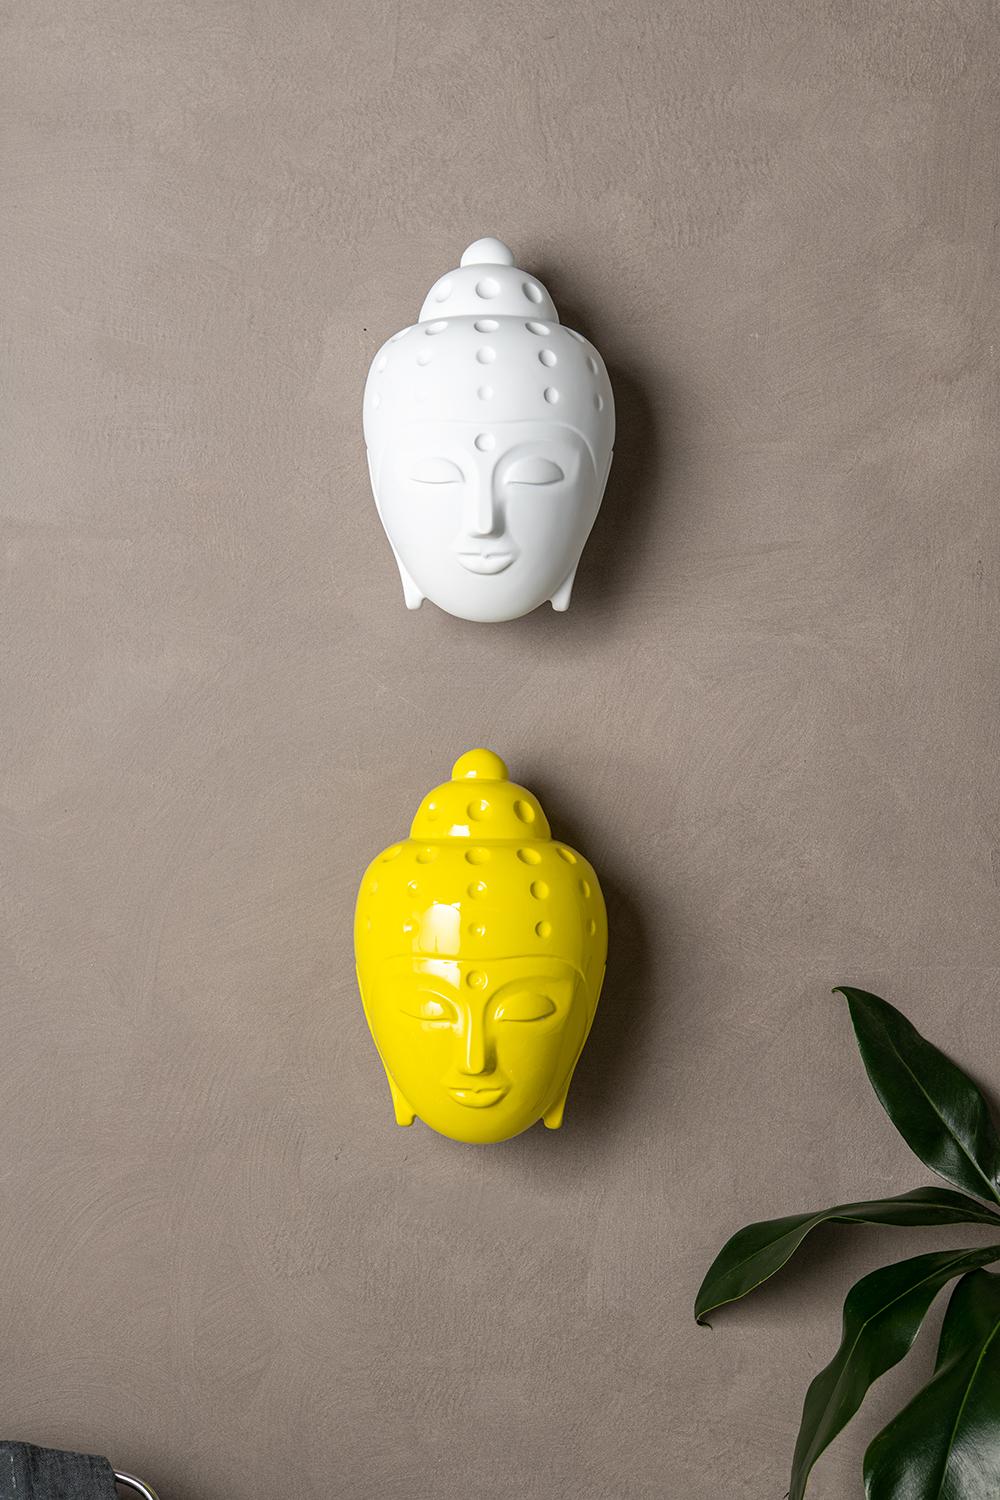 This beautiful Buddha sculpture is made of ceramic covered with glossy car paint. It is part of an edition of 25 and comes in other colors as well.
Easy to hang and will bring color and good vibes to any space it will be in.
It is made as a reminder